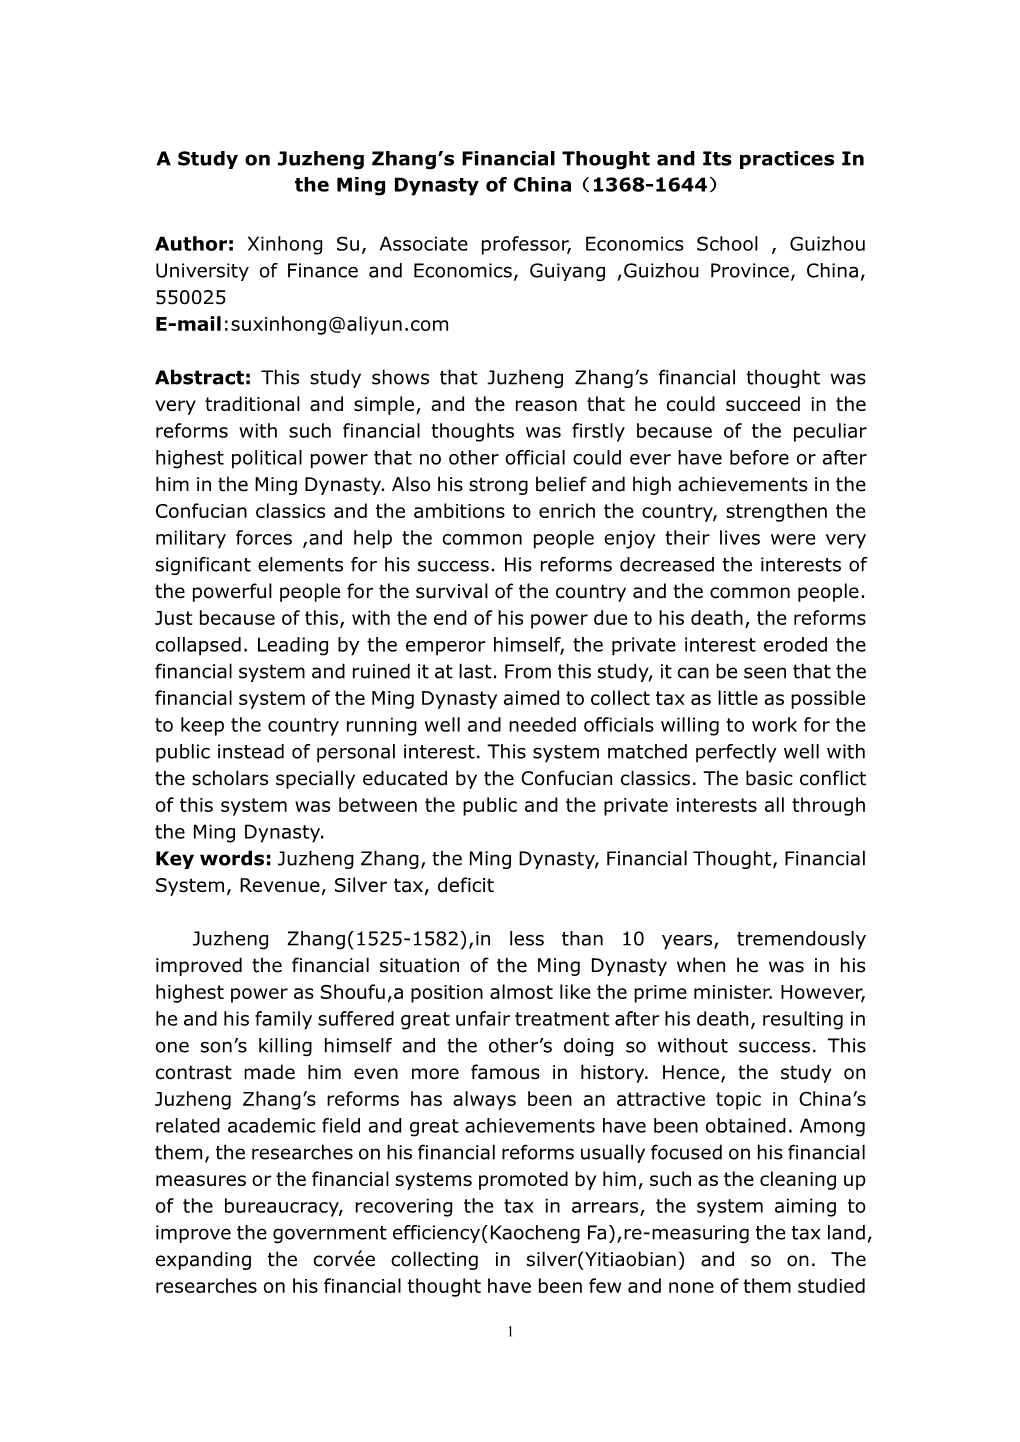 A Study on Juzheng Zhang's Financial Thought and Its Practices in the Ming Dynasty of China（1368-1644） Author: Xinhong